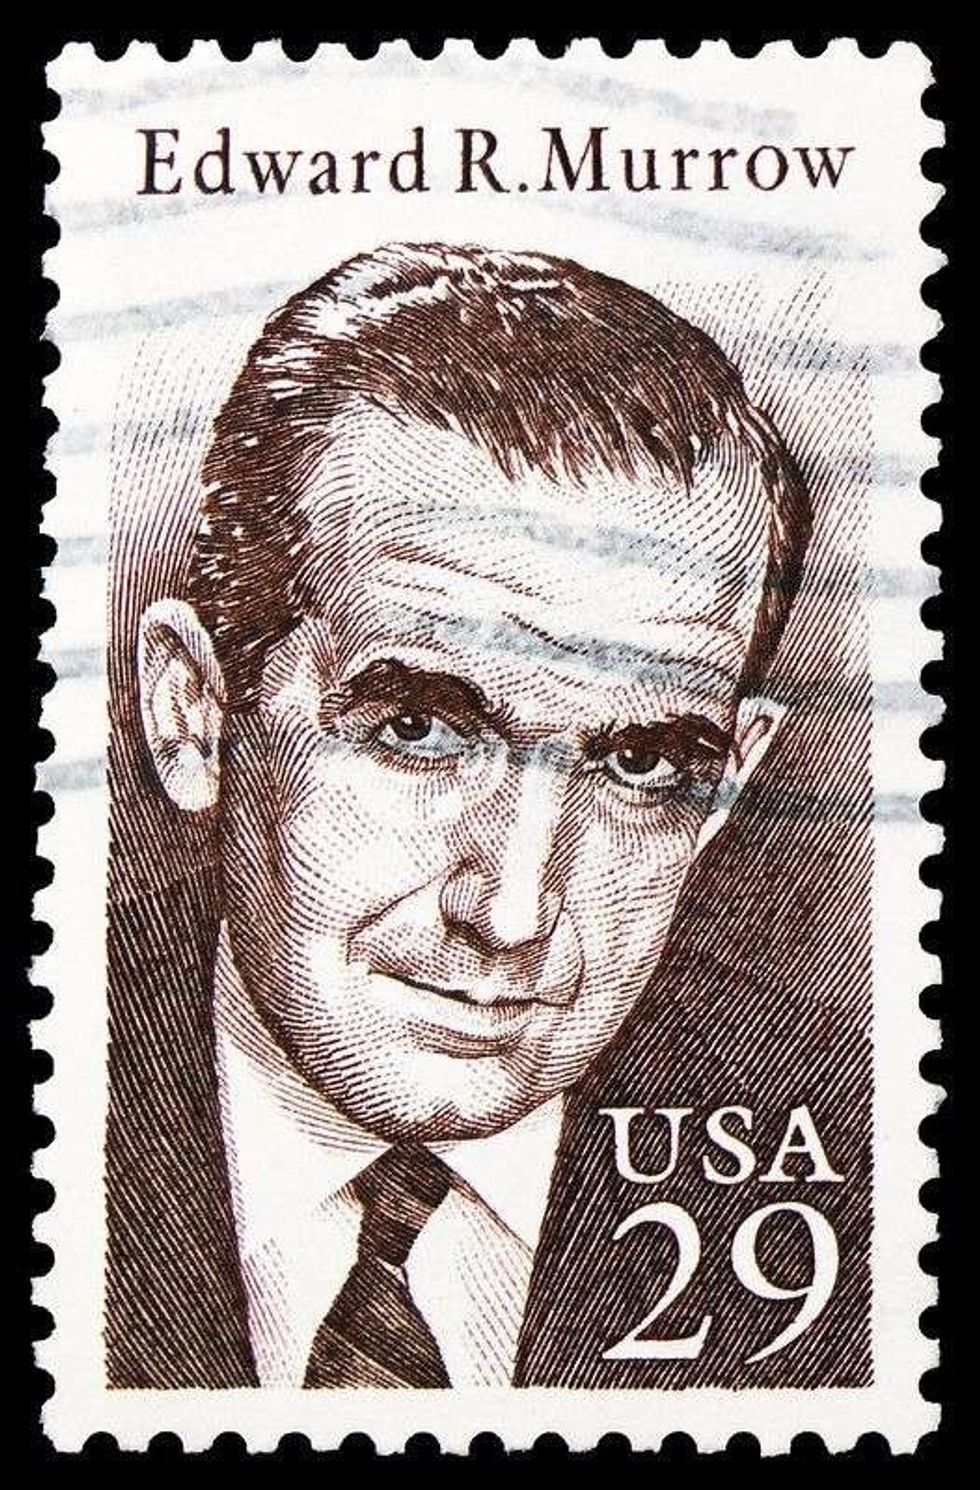 Learn all the exciting facts about Edward R. Murrow here at Kidadl.